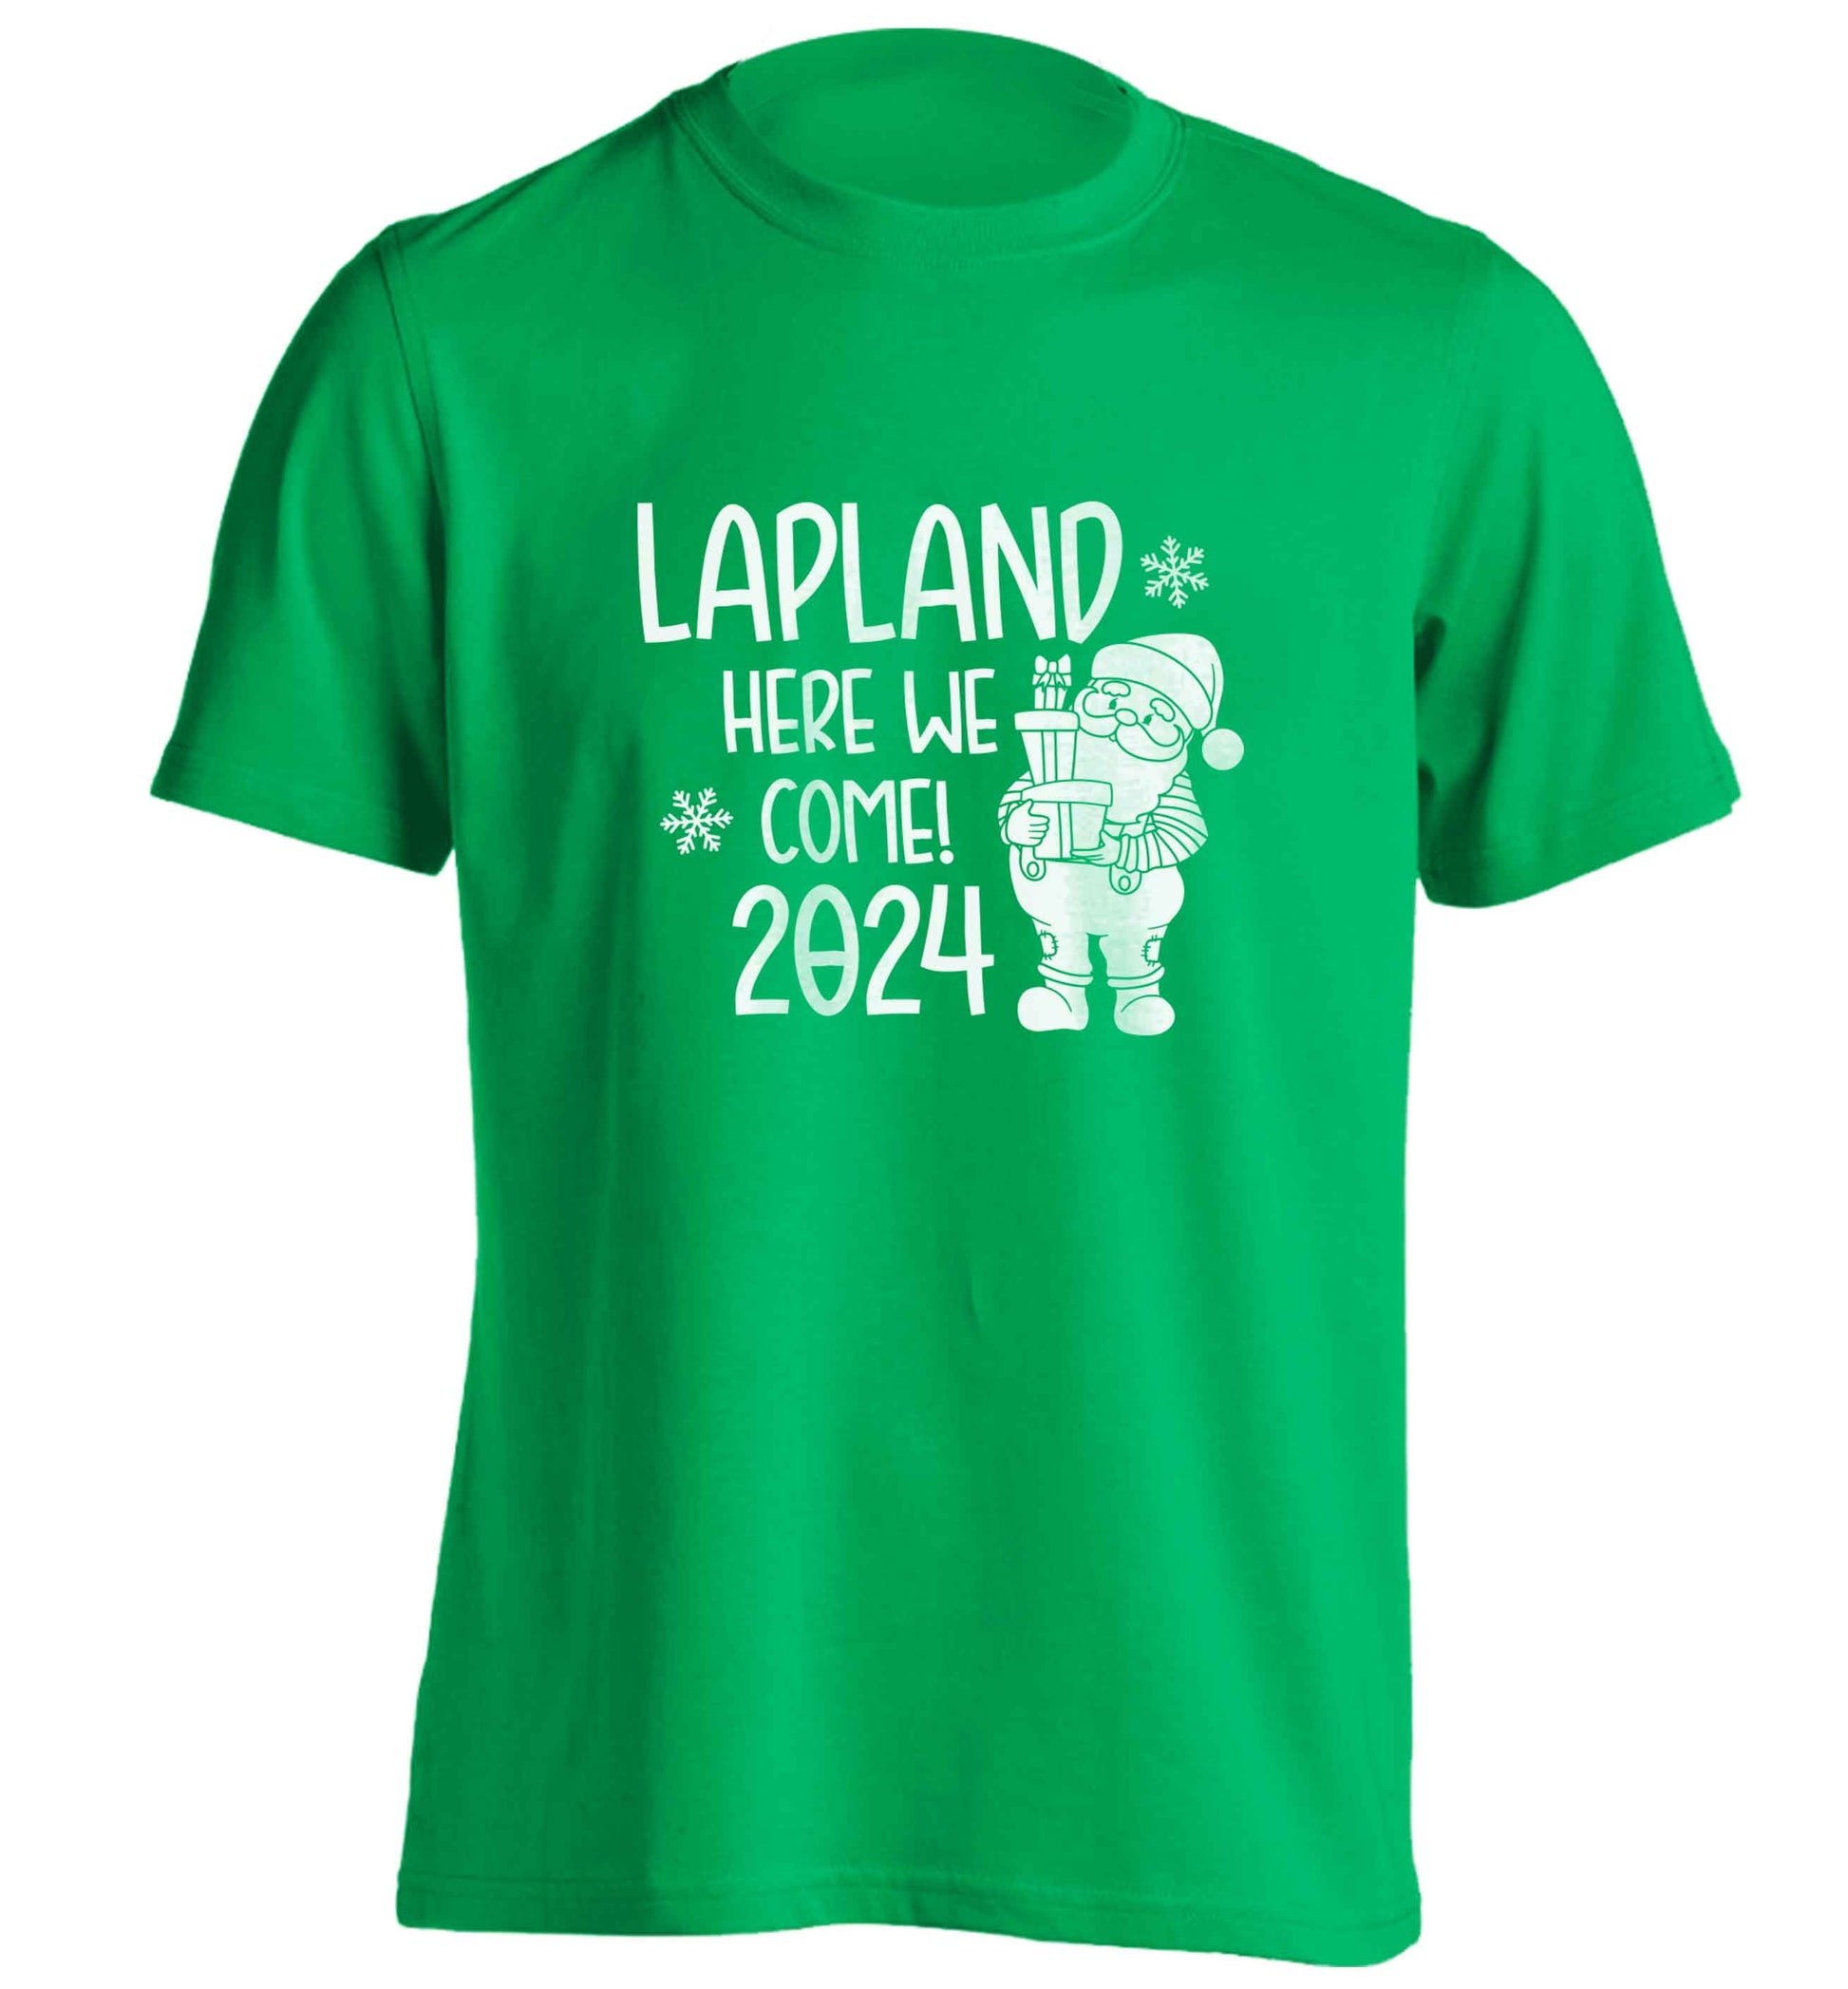 Lapland here we come adults unisex green Tshirt 2XL